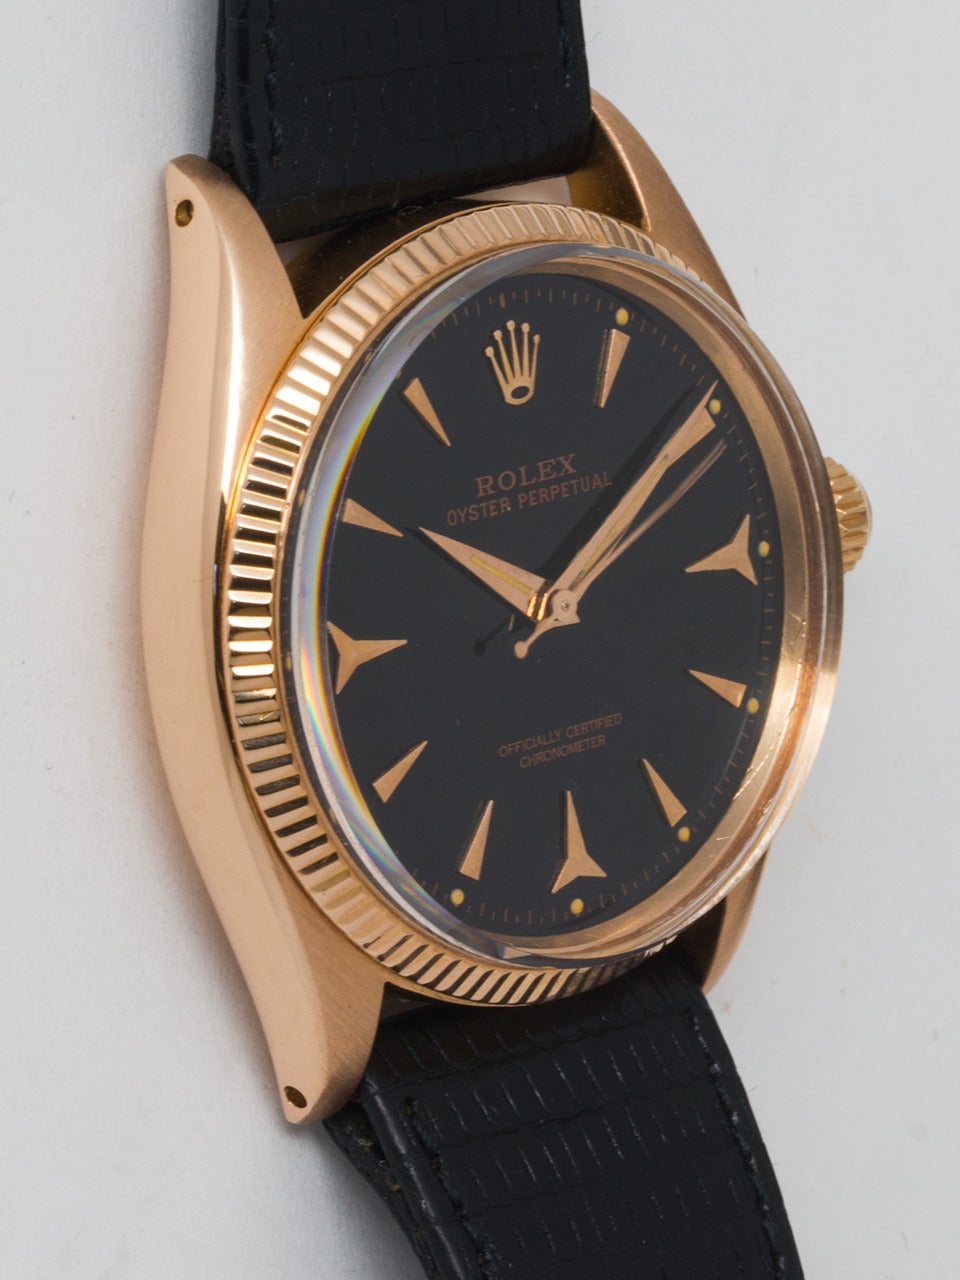 Rolex 18K rose gold Oyster Perpetual wristwatch, Ref. 6567, serial number 167,XXX, circa 1956. 34 mm man's model with fluted bezel and acrylic crystal. Black dial with applied faceted dagger indexes and dauphine hands. Powered by a self-winding